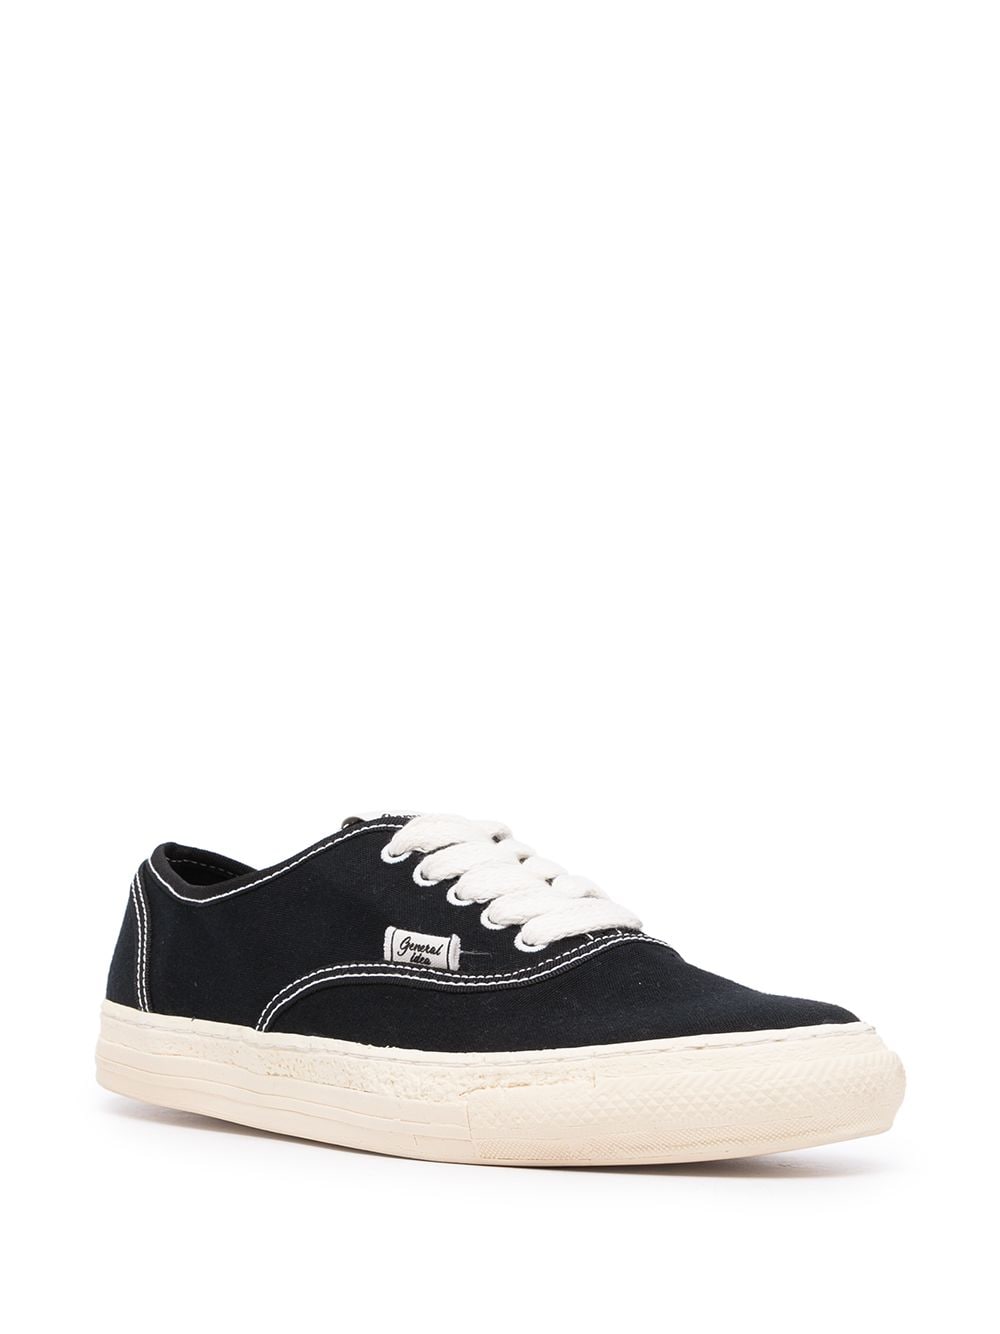 Image 2 of Maison MIHARA YASUHIRO General Scale lace-up low sneakers